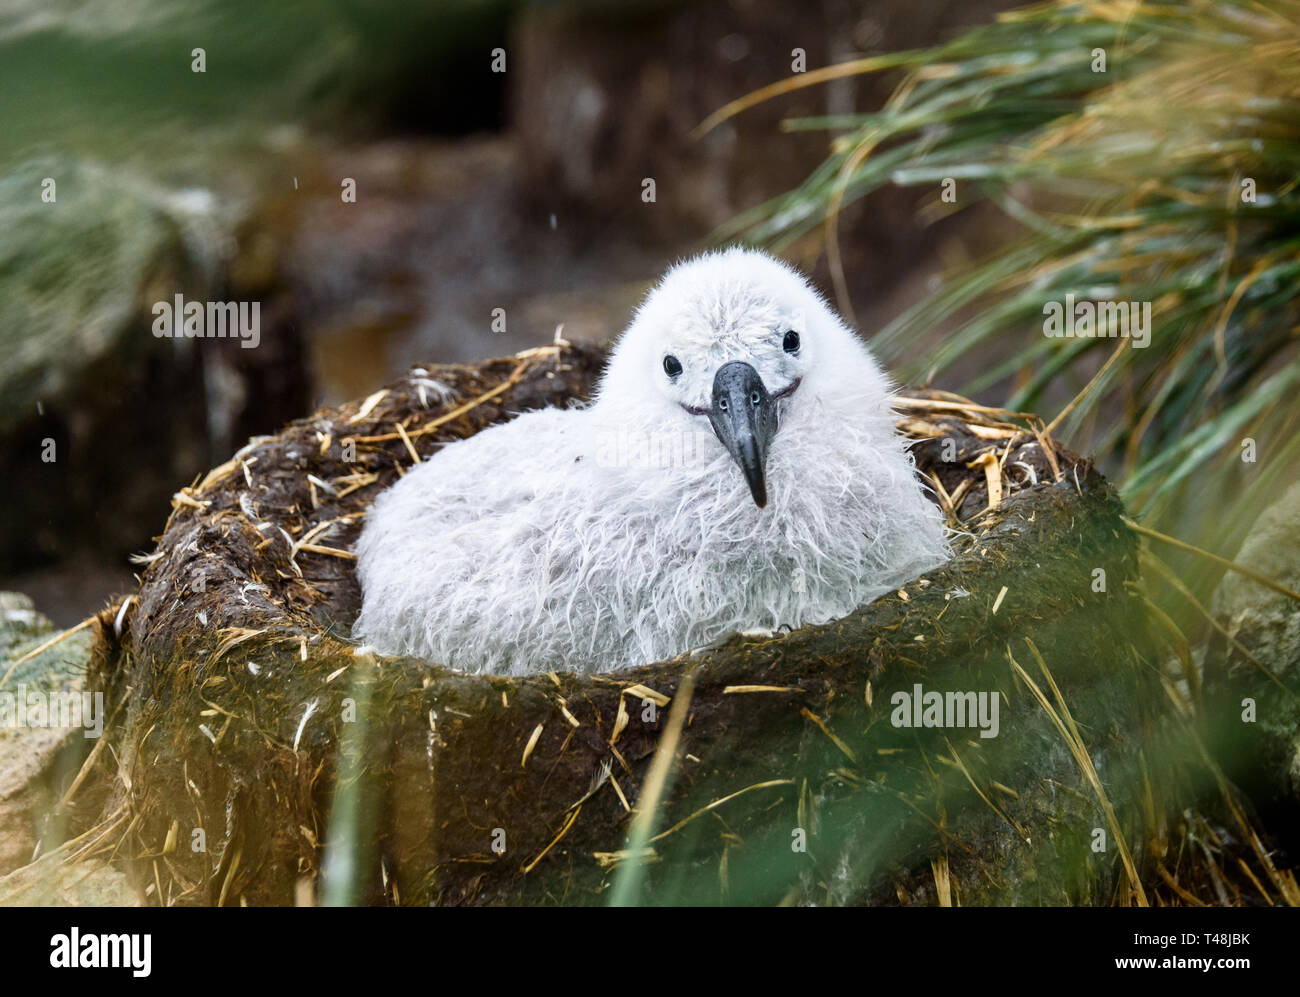 Cute Black-Browed Albatross chick on mud and grass nest, Albatross and Penguin rookery, Falkland Islands Stock Photo